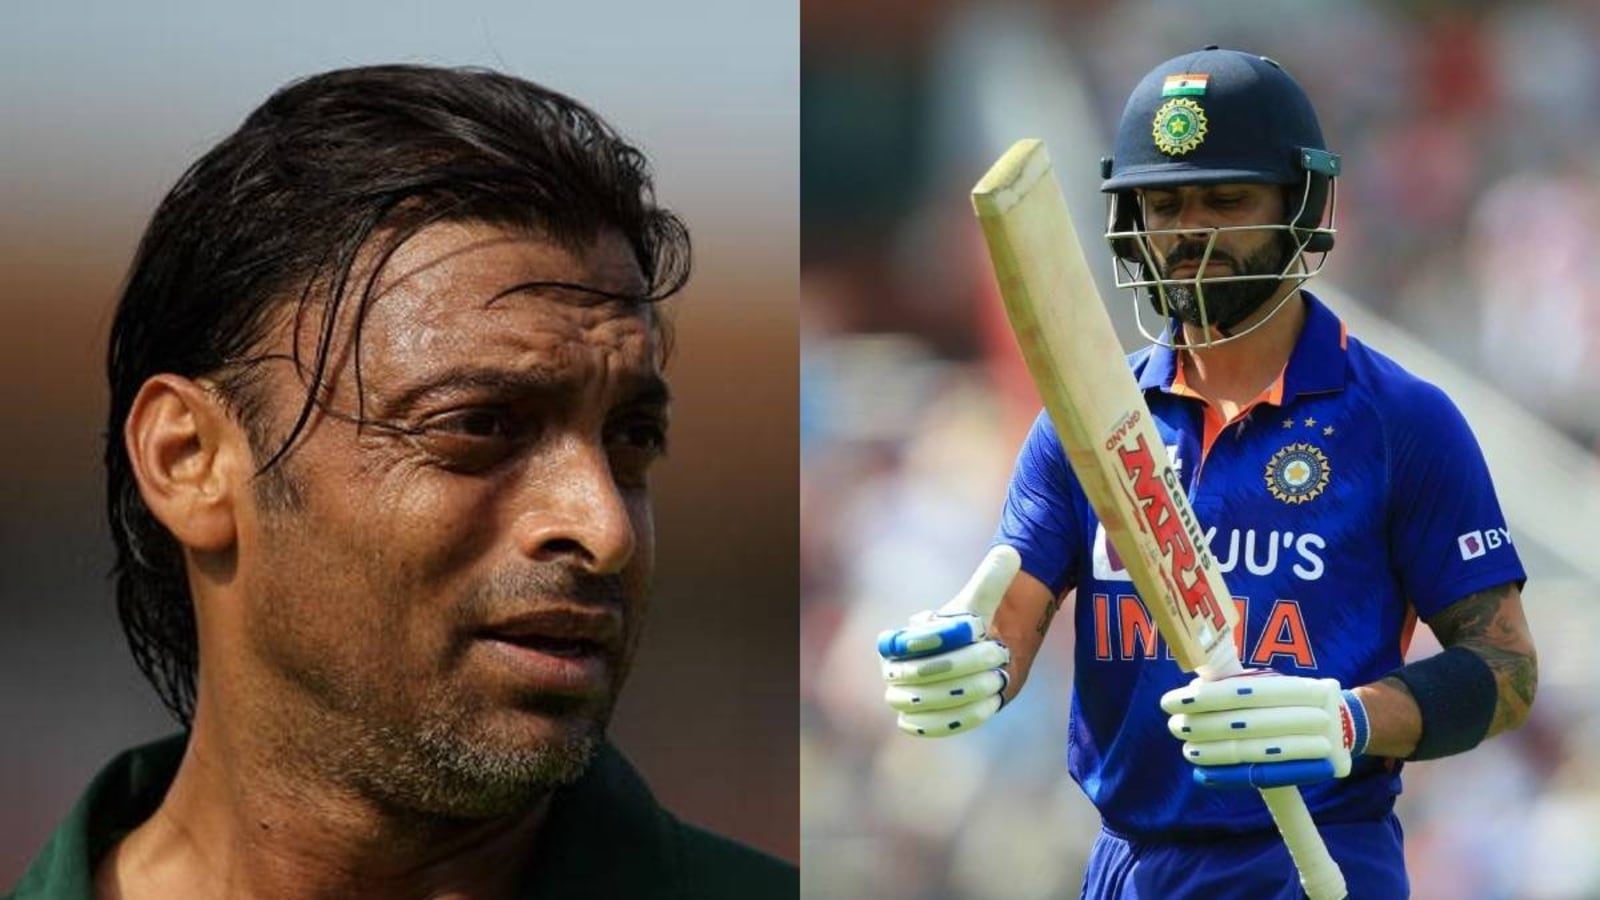 shoaib-akhtar-comes-up-with-priceless-two-word-reply-to-fan-s-virat-kohli-question